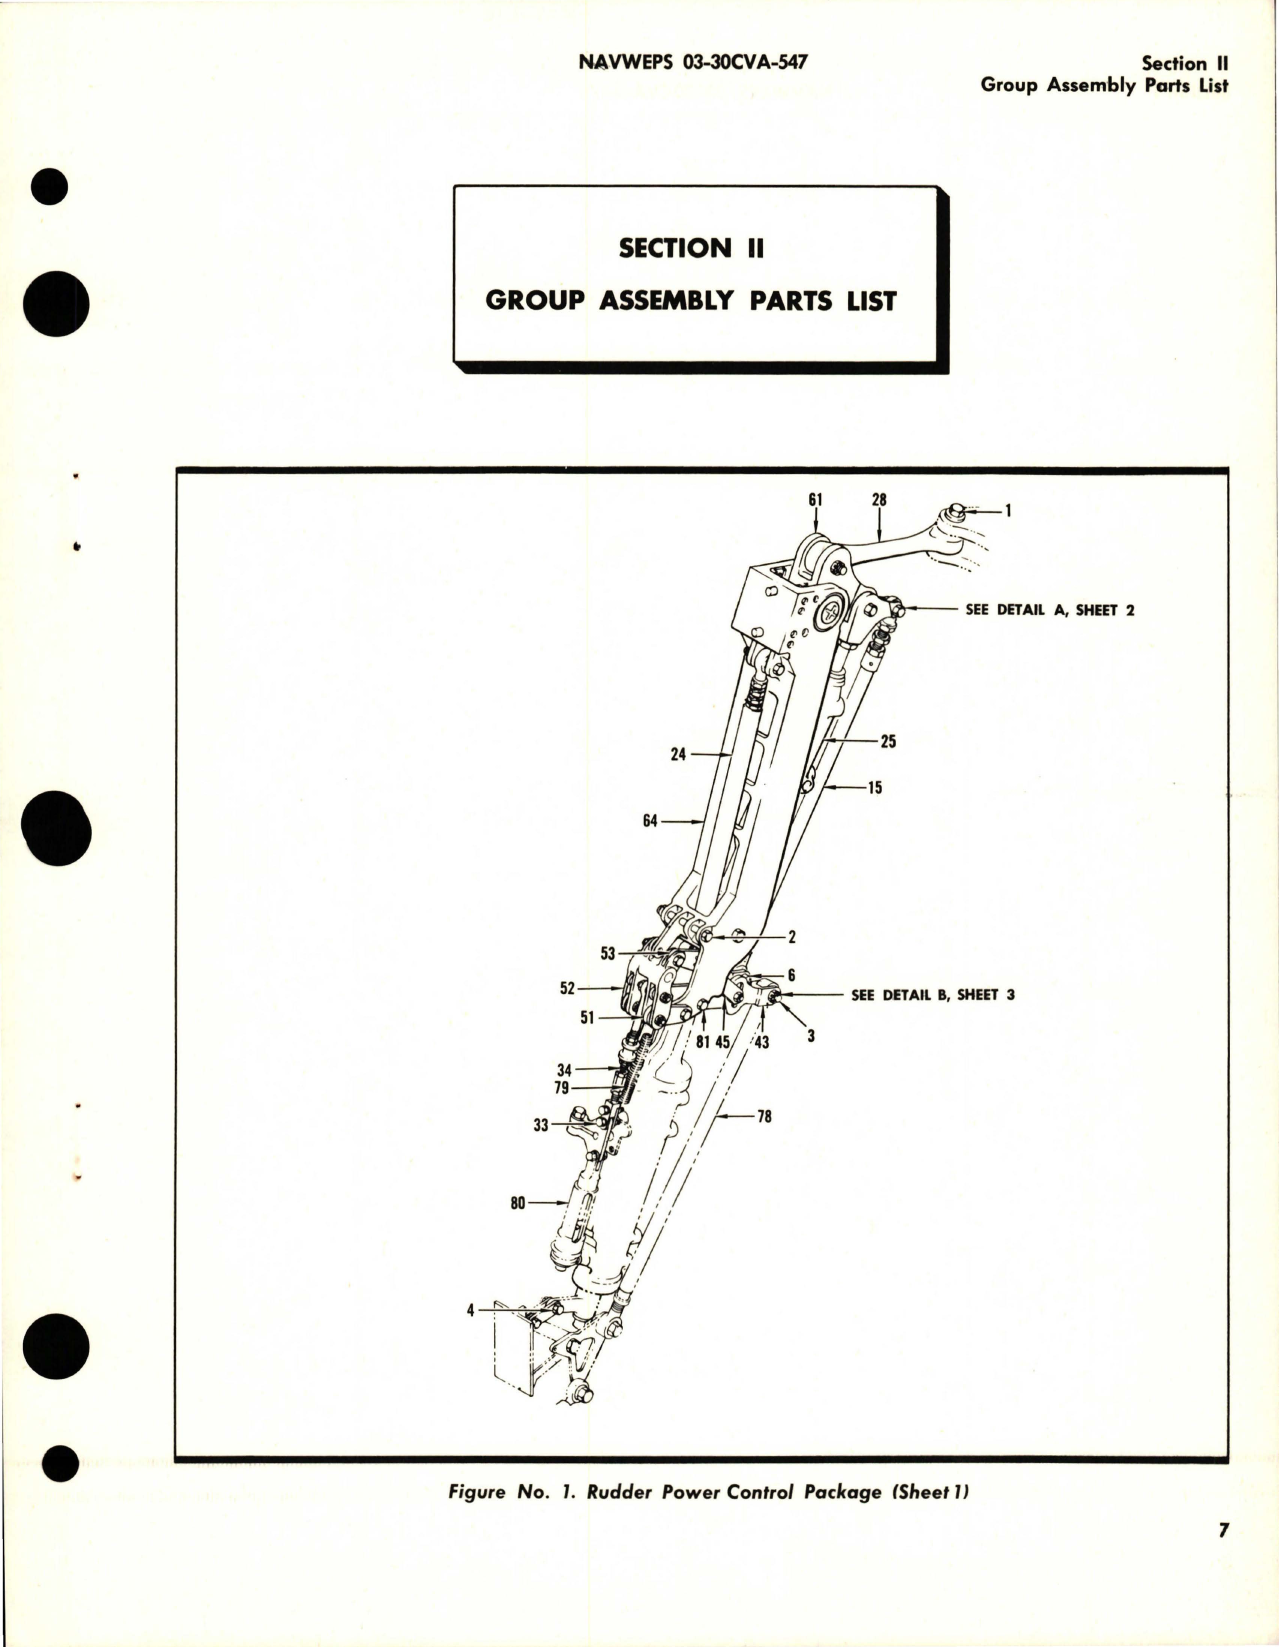 Sample page 9 from AirCorps Library document: Illustrated Parts Breakdown for Rudder Power Control, Cylinder and Valve Assembly, Rigging and Synchronization Fixtures